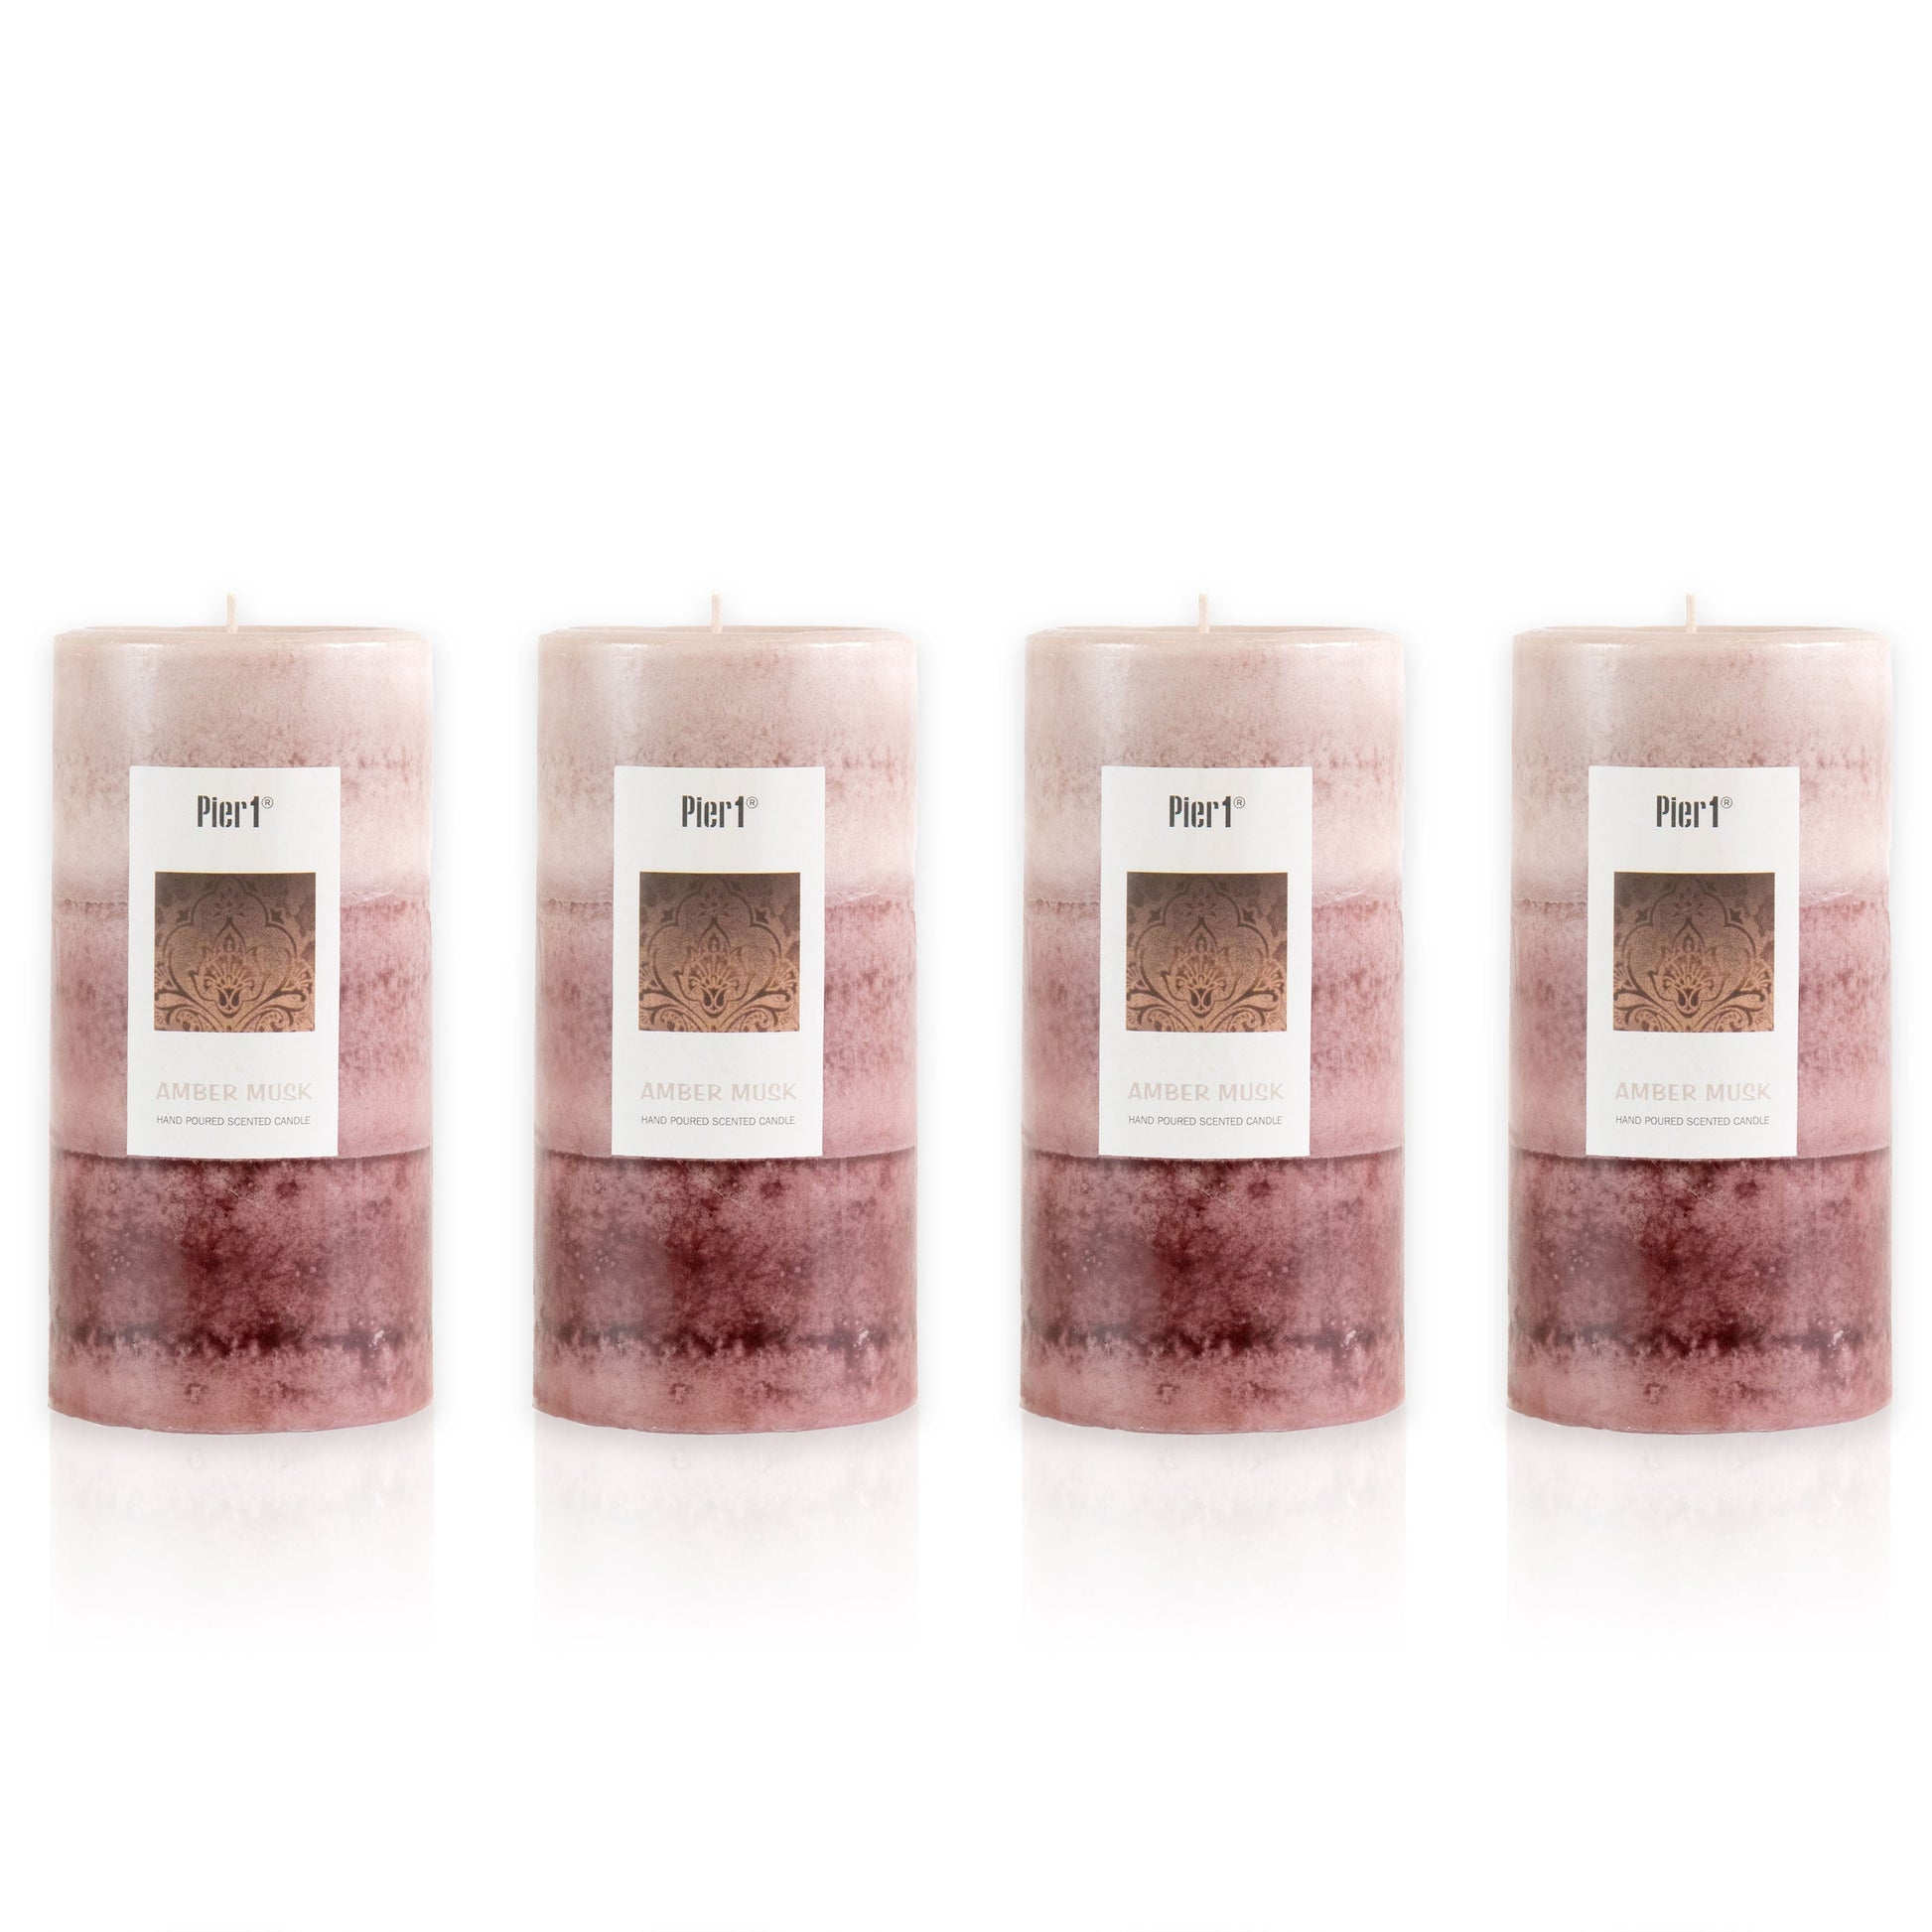 Pier 1 Amber Musk 3x6 Layered Set of 4 Pillar Candles - The Home Resolution